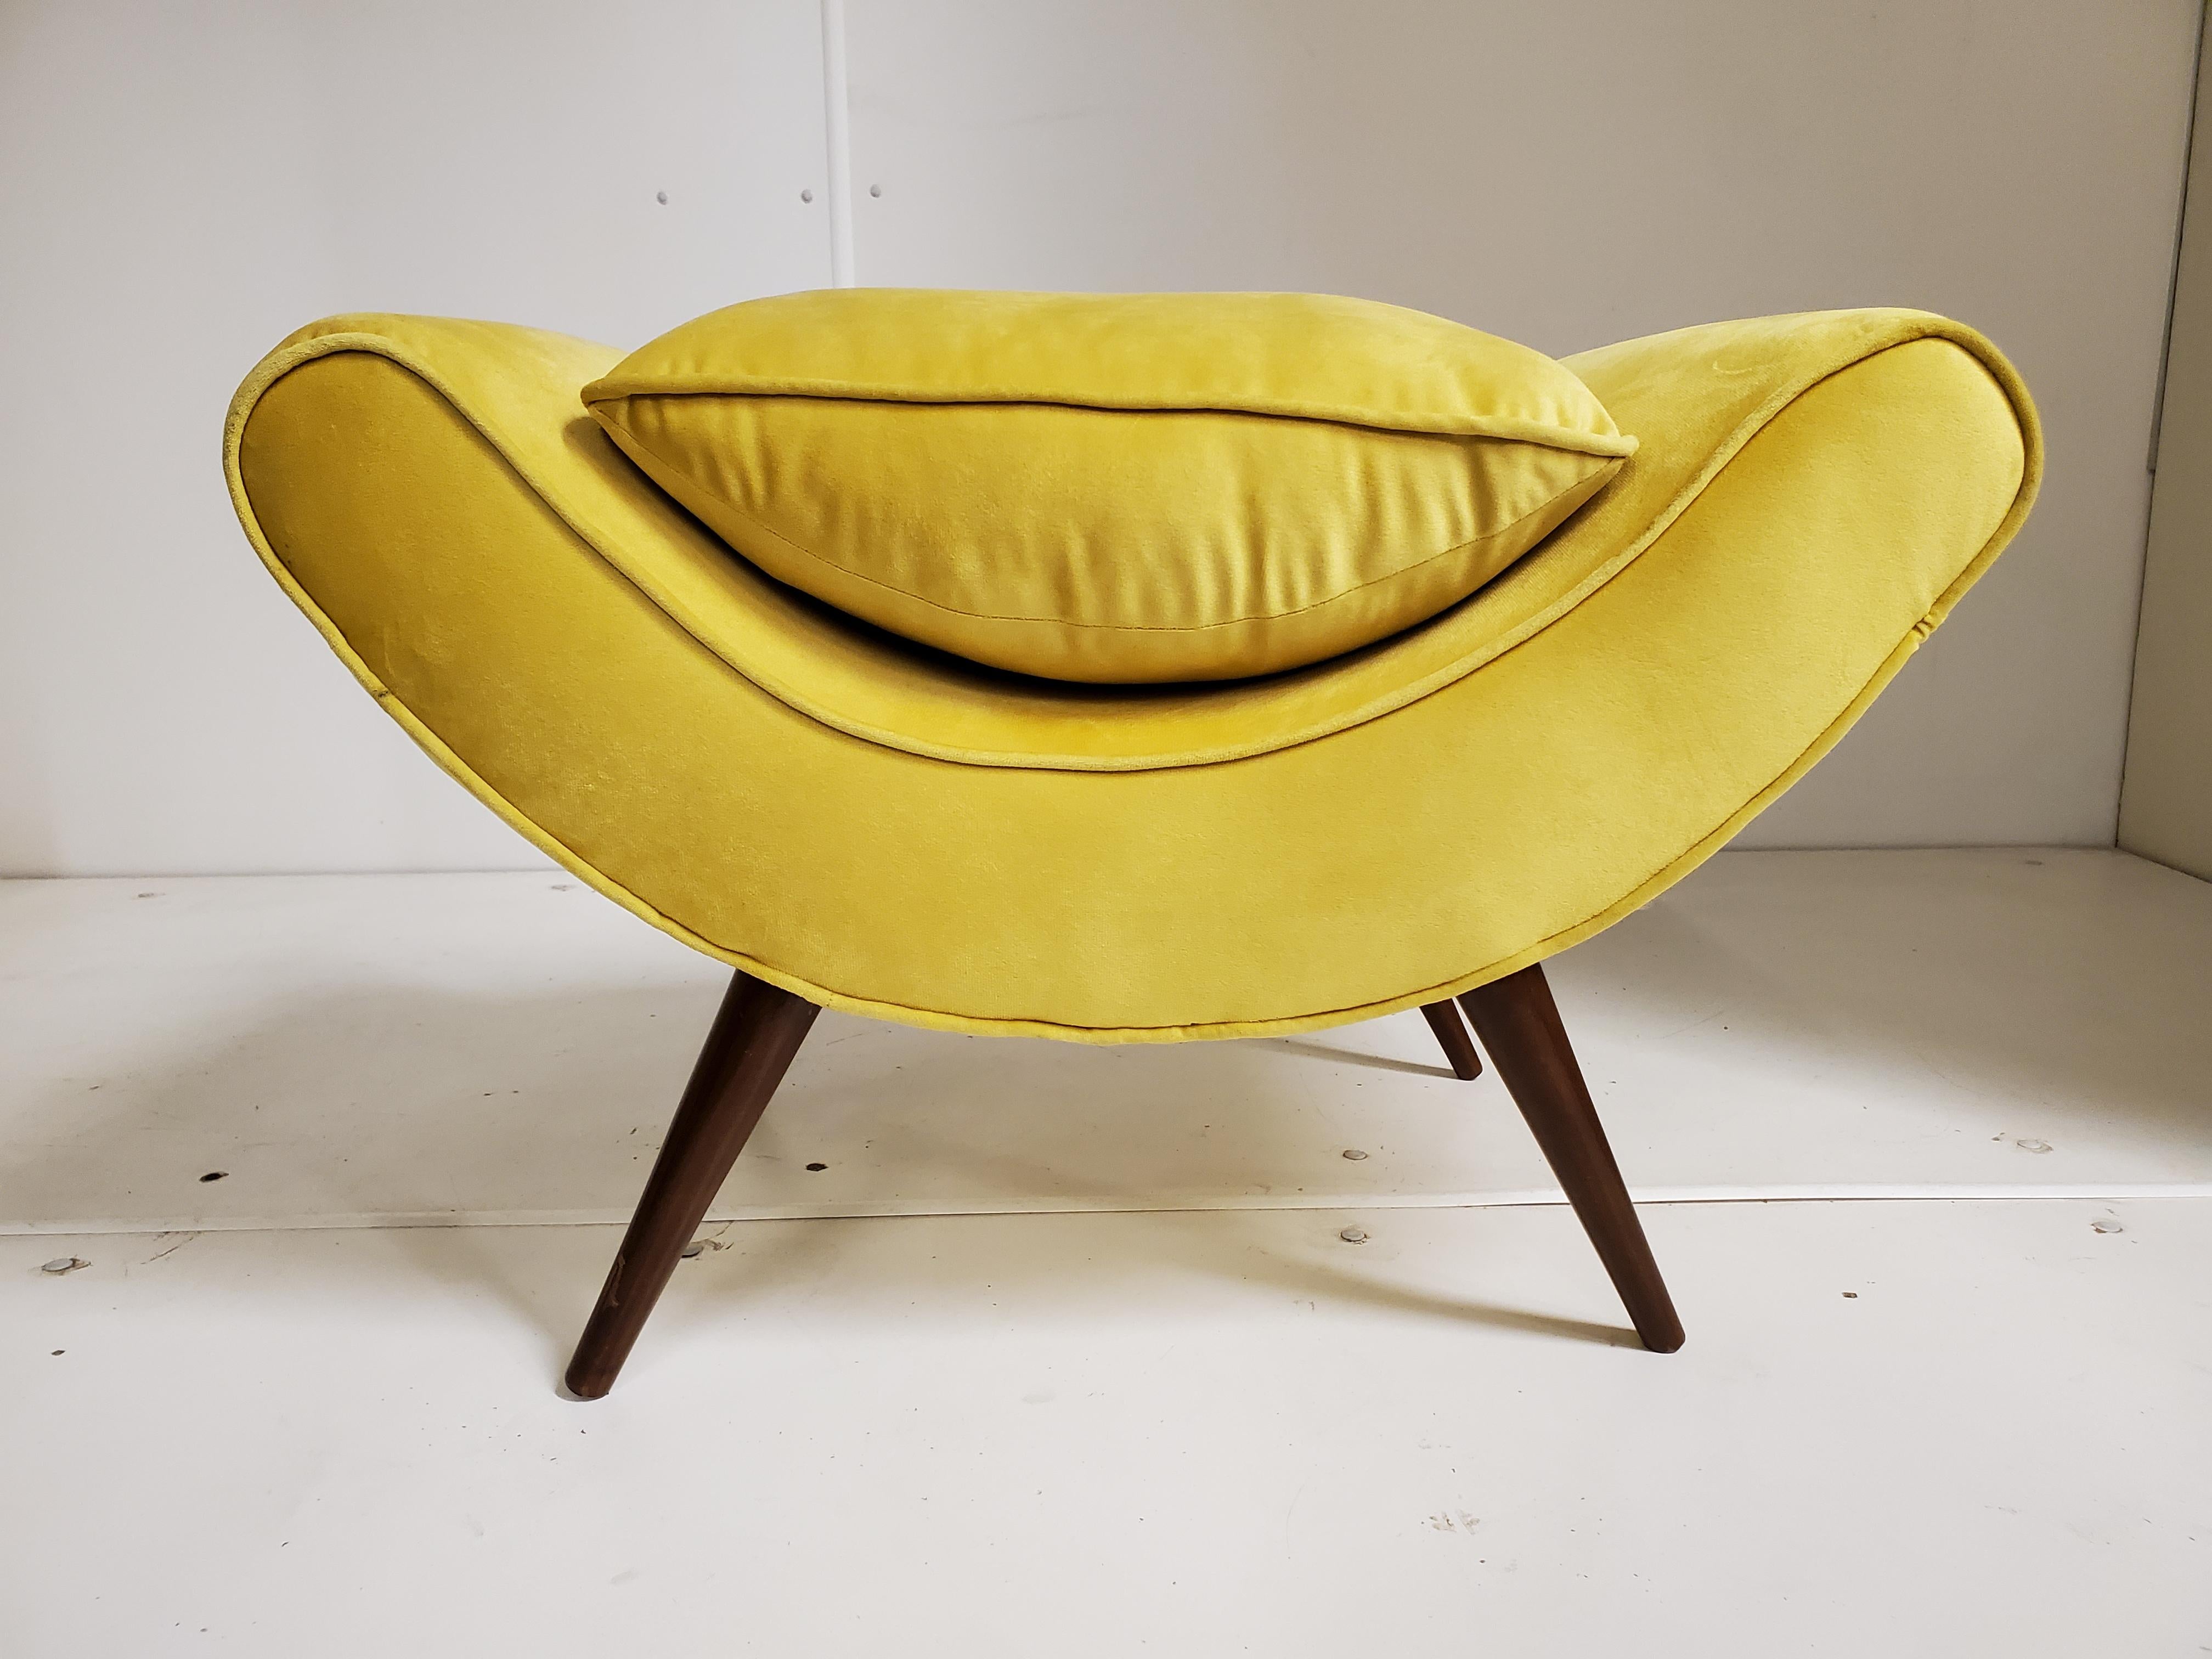 A beautiful modernist yellow velvet upholstered small bench with four turned wood and tapered splay legs.
This organic 